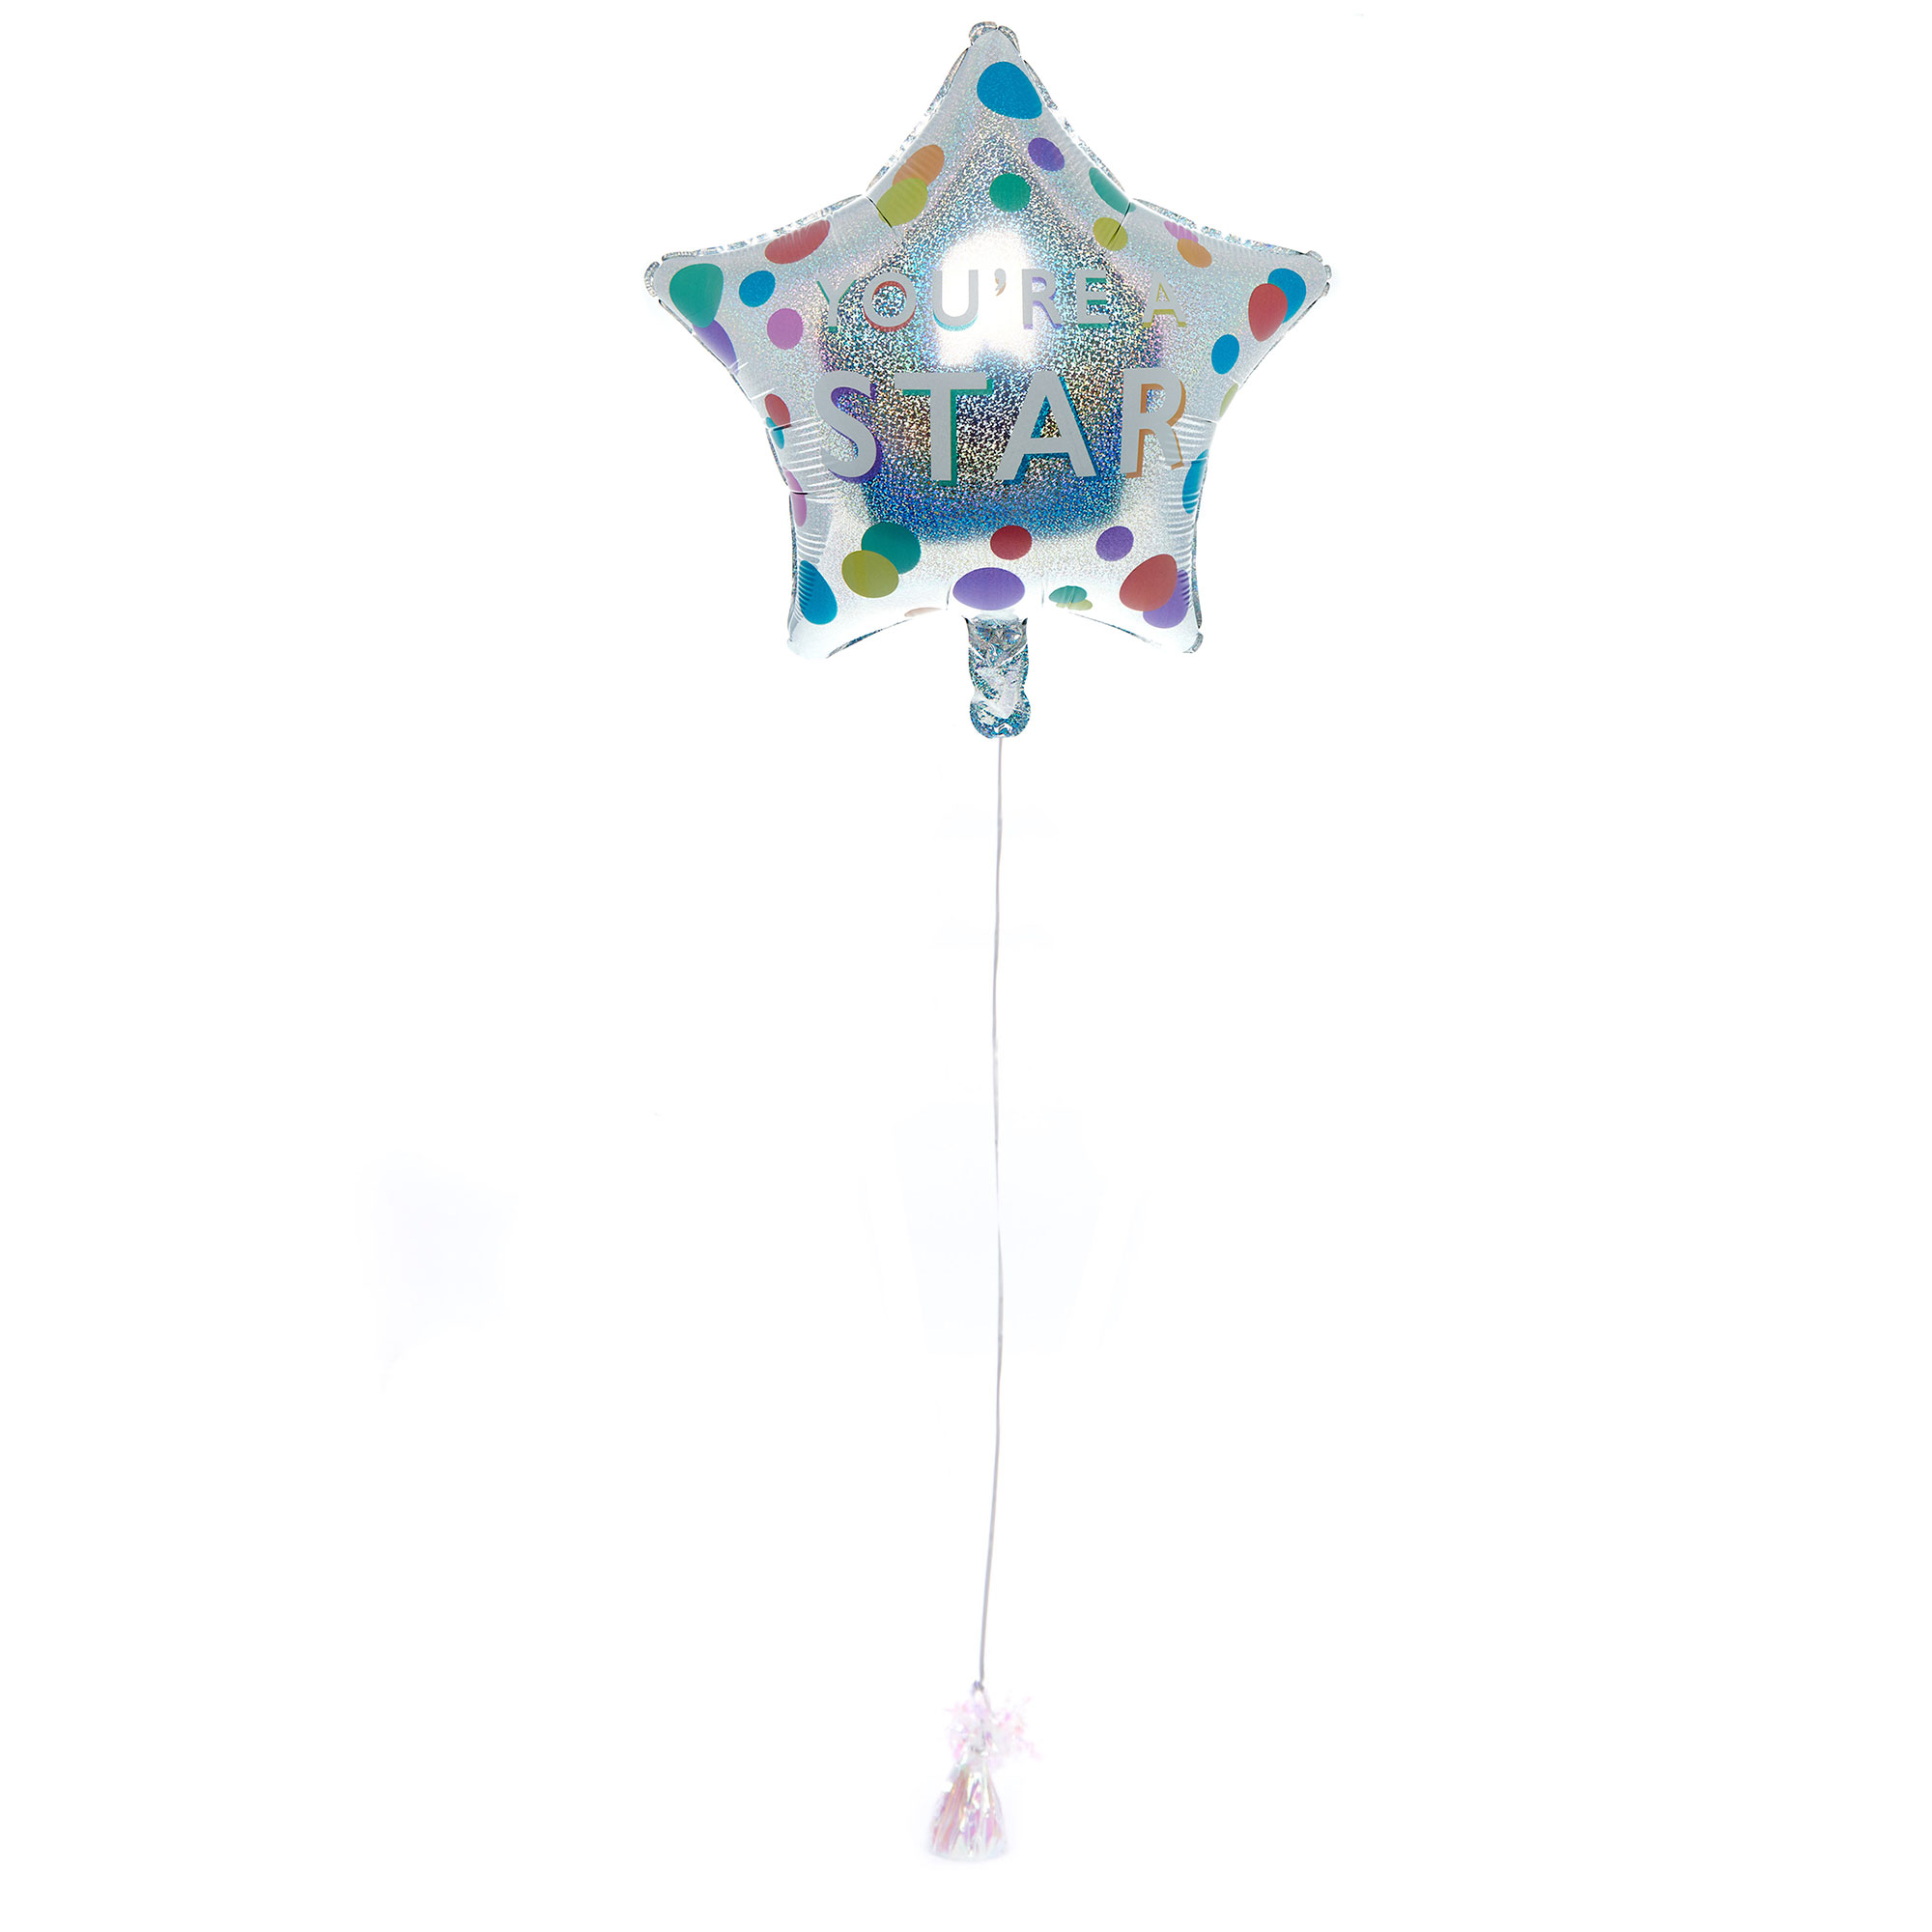 You're A Star Balloon & Lindt Chocolate Box - FREE GIFT CARD!